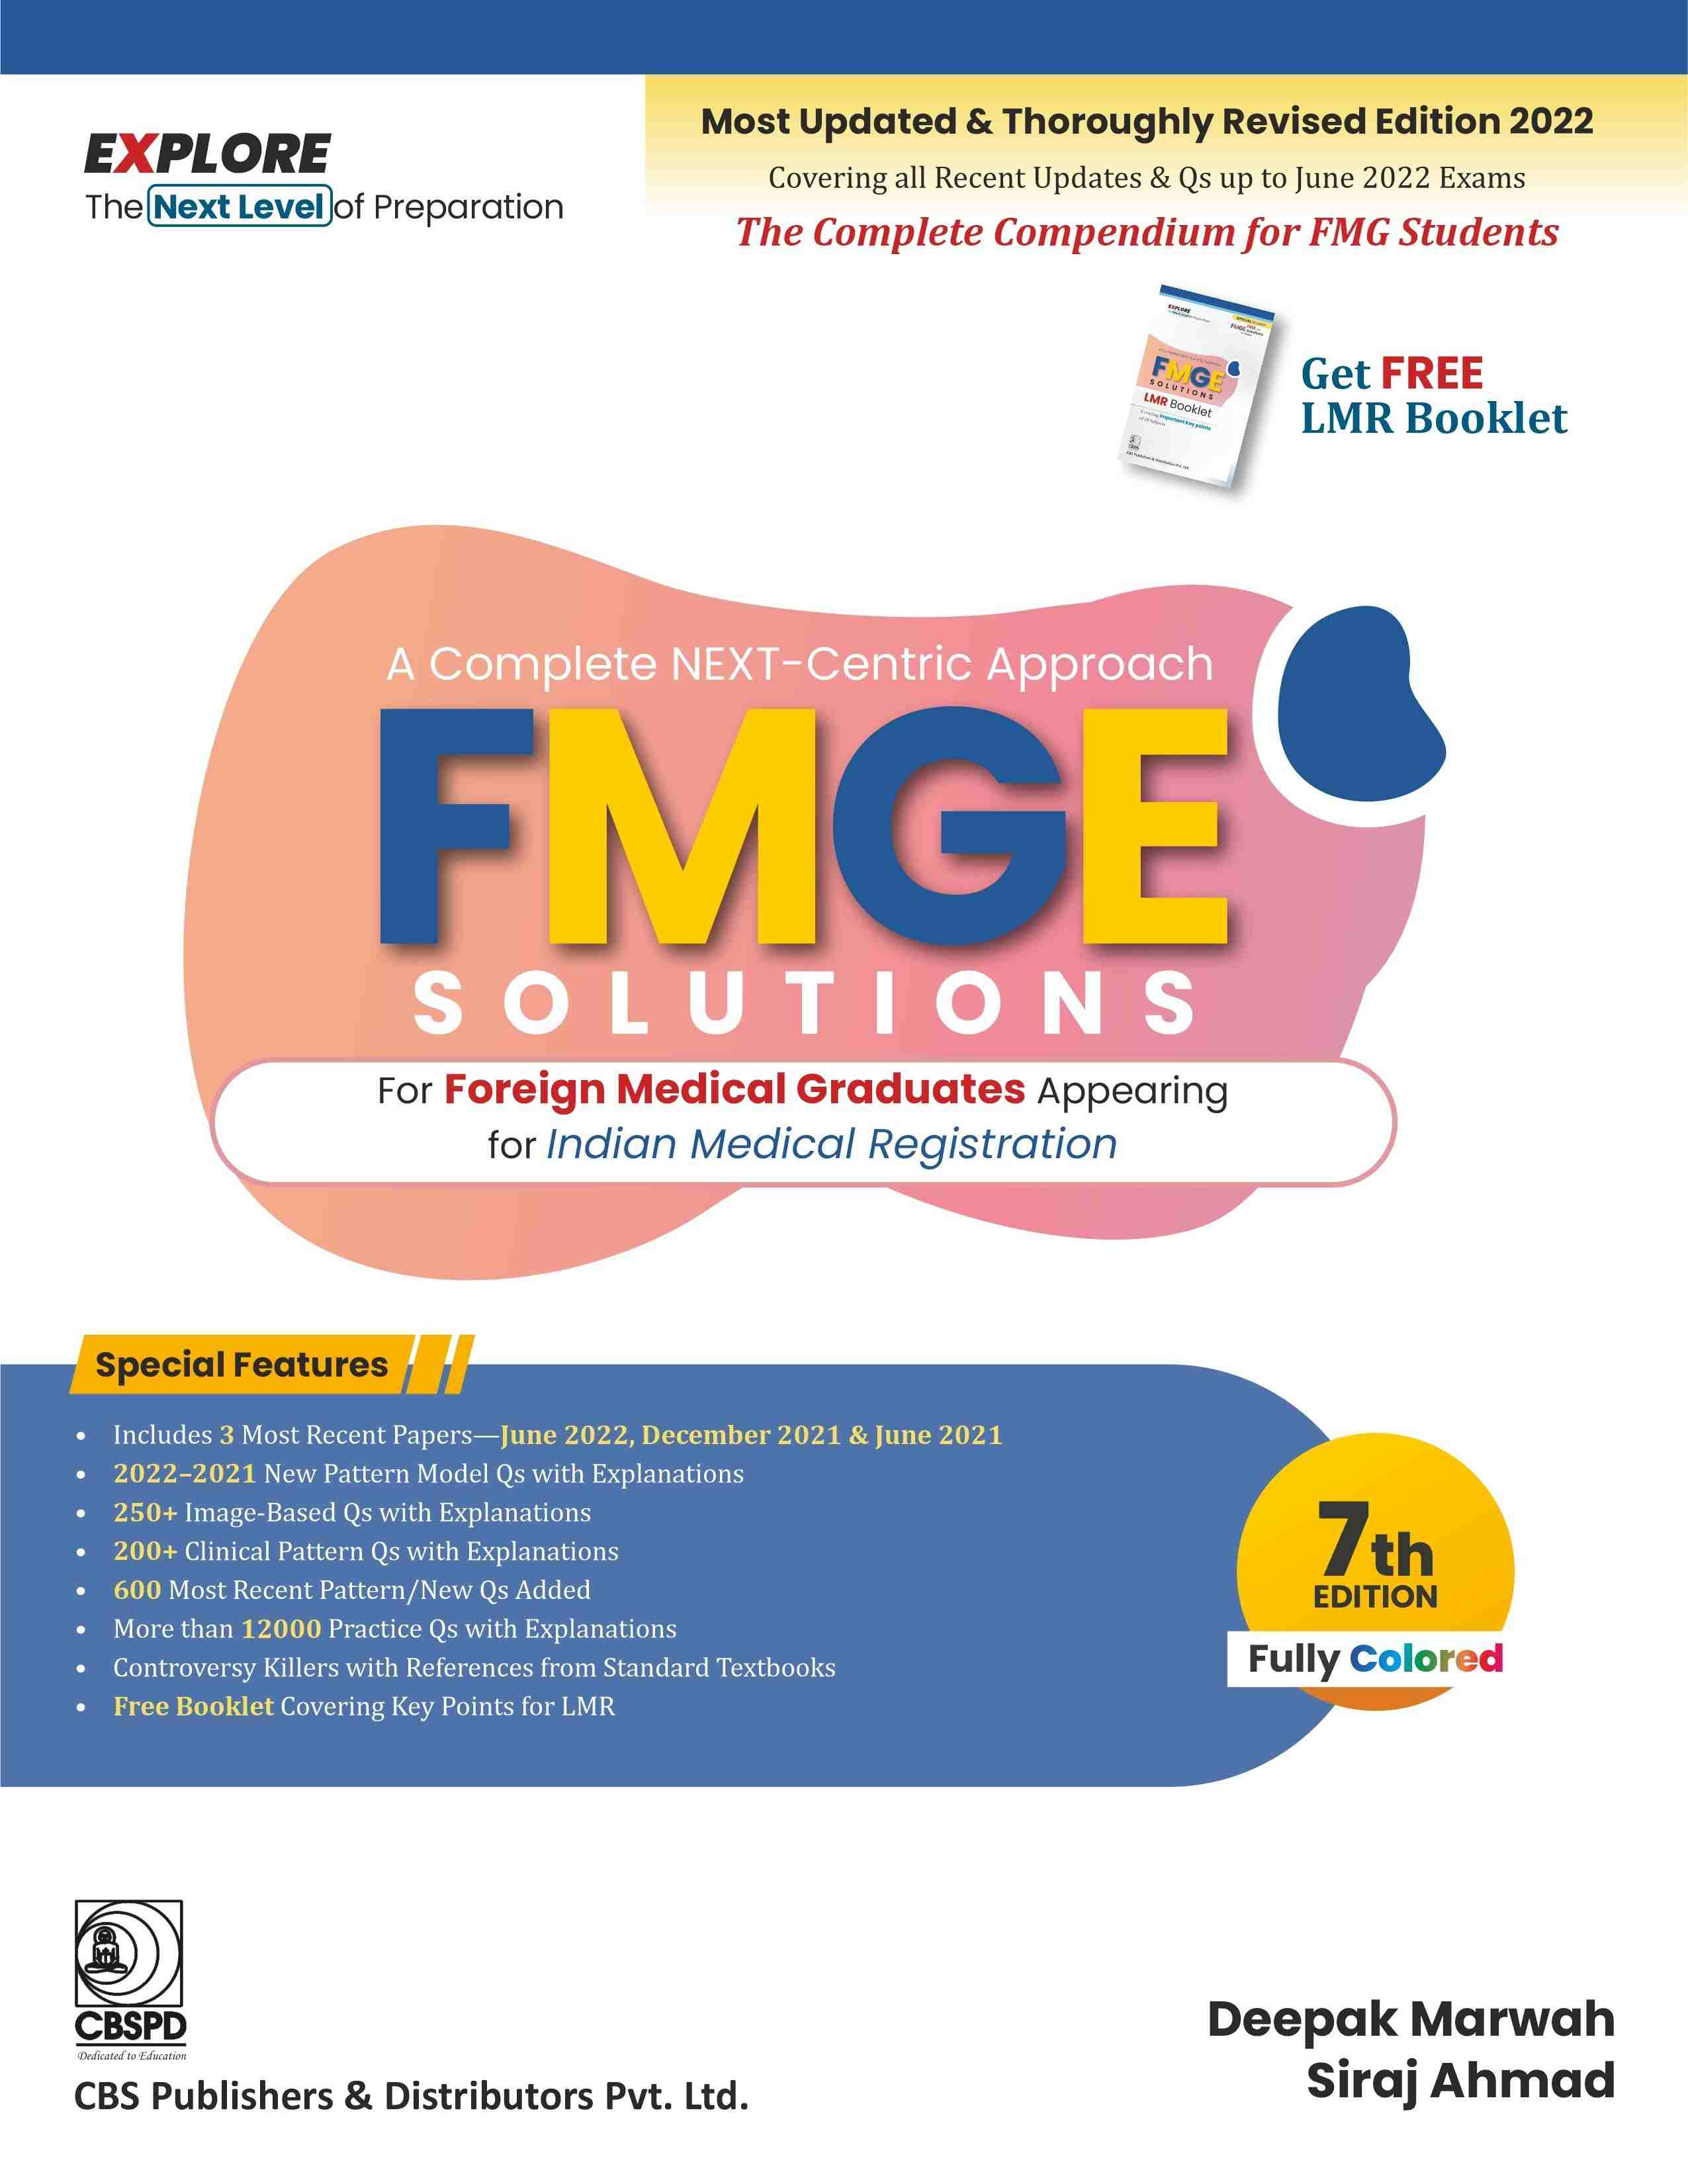 
best-sellers/cbs/a-complete-next-centric-approach-fmge-solutions-for-foreign-medical-graduates-appearing-for-indian-medical-registration-7ed-with-booklet-pb-2023--9789390619313